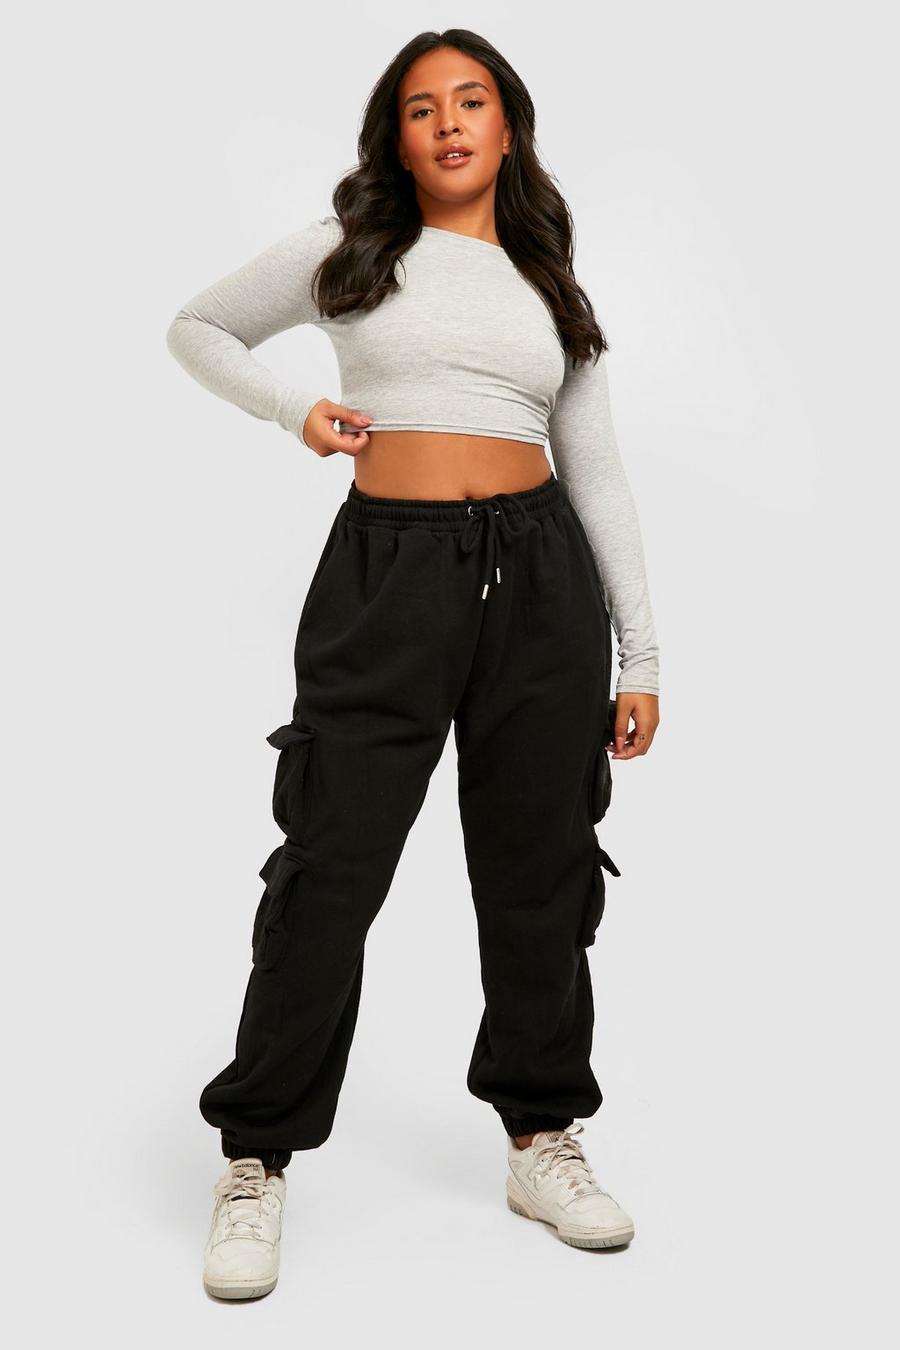 Plus Size Women's Black Solid Joggers With Pockets